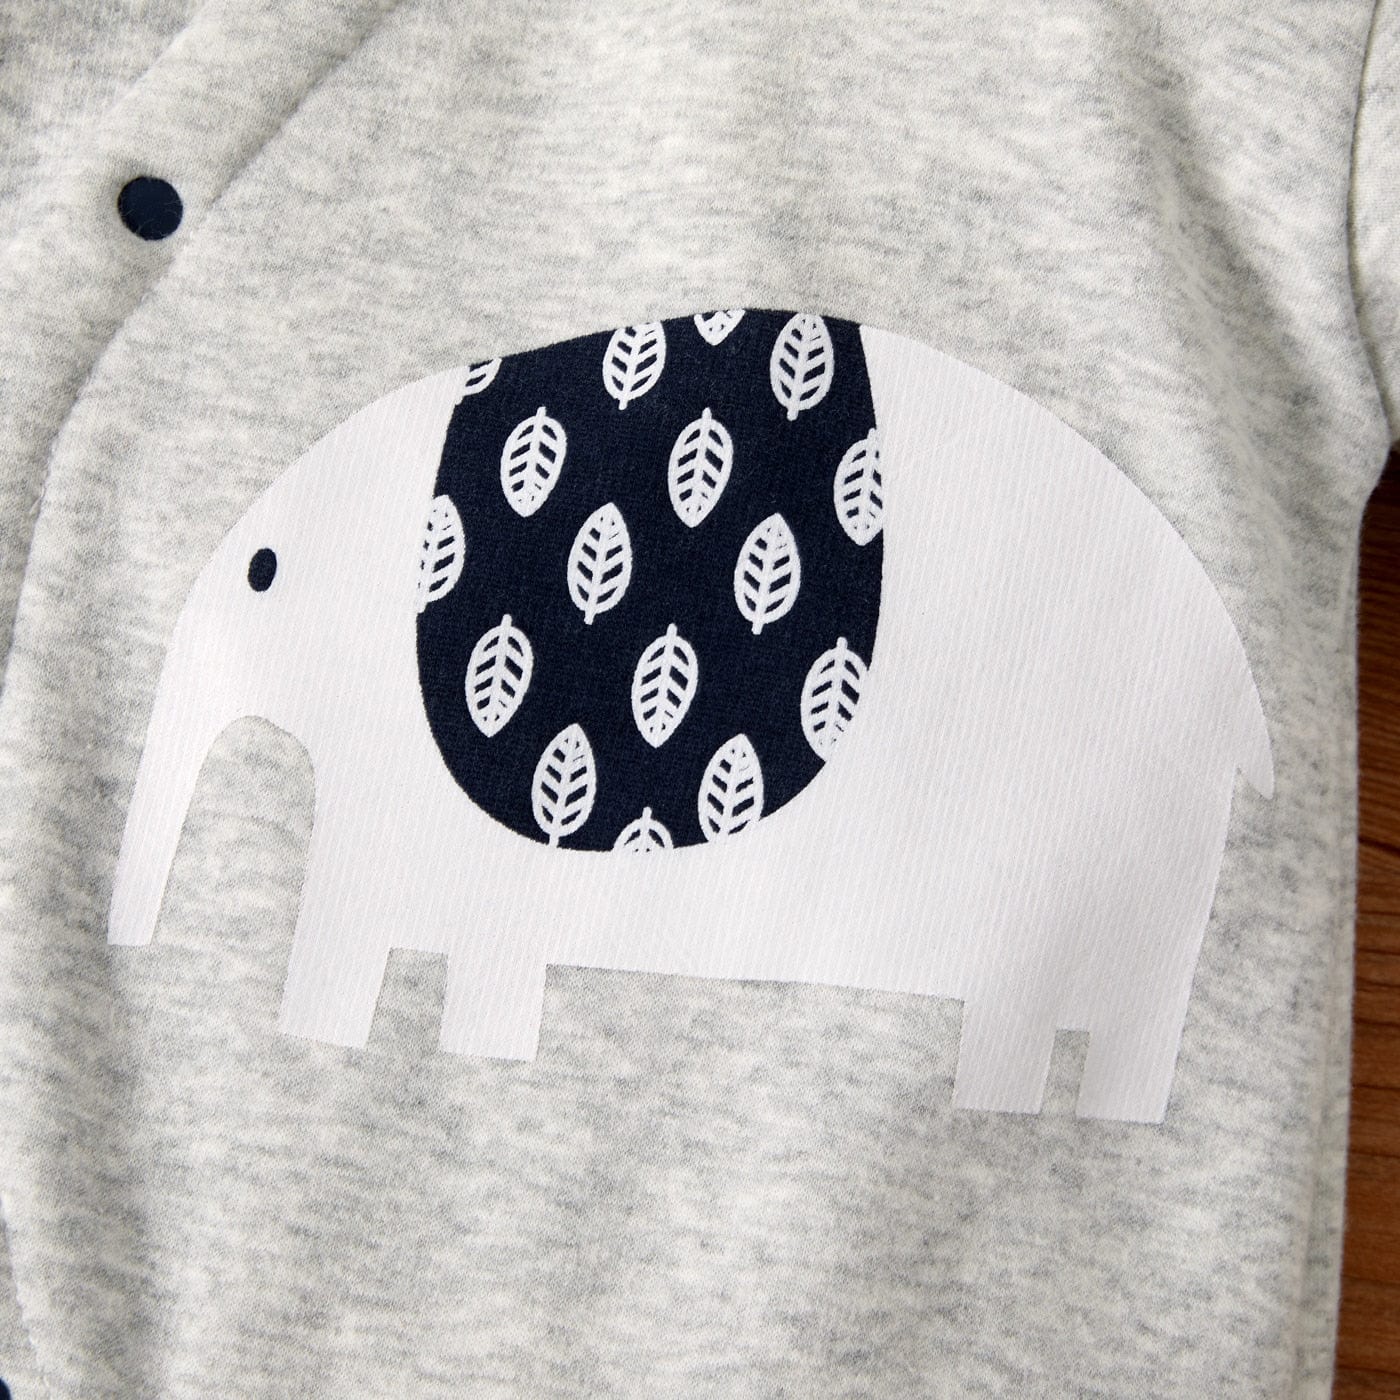 Proactive Baby Baby Romper For Newborn Baby Boys Spring Autumn Clothes Baby Warm Animal Elephant Jumpsuit